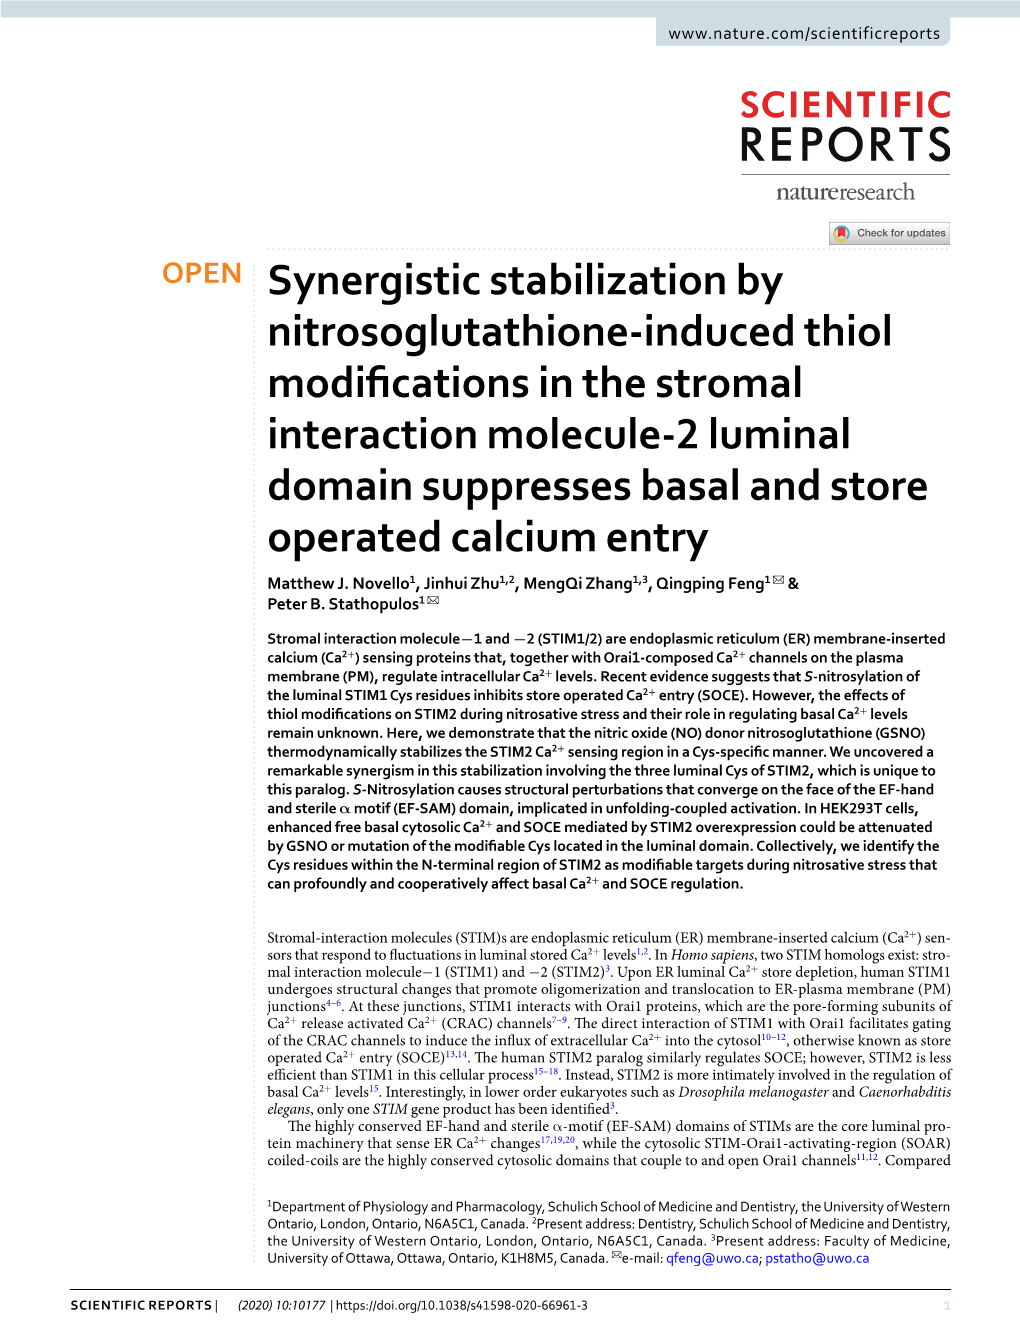 Synergistic Stabilization by Nitrosoglutathione-Induced Thiol Modifications in the Stromal Interaction Molecule-2 Luminal Domain